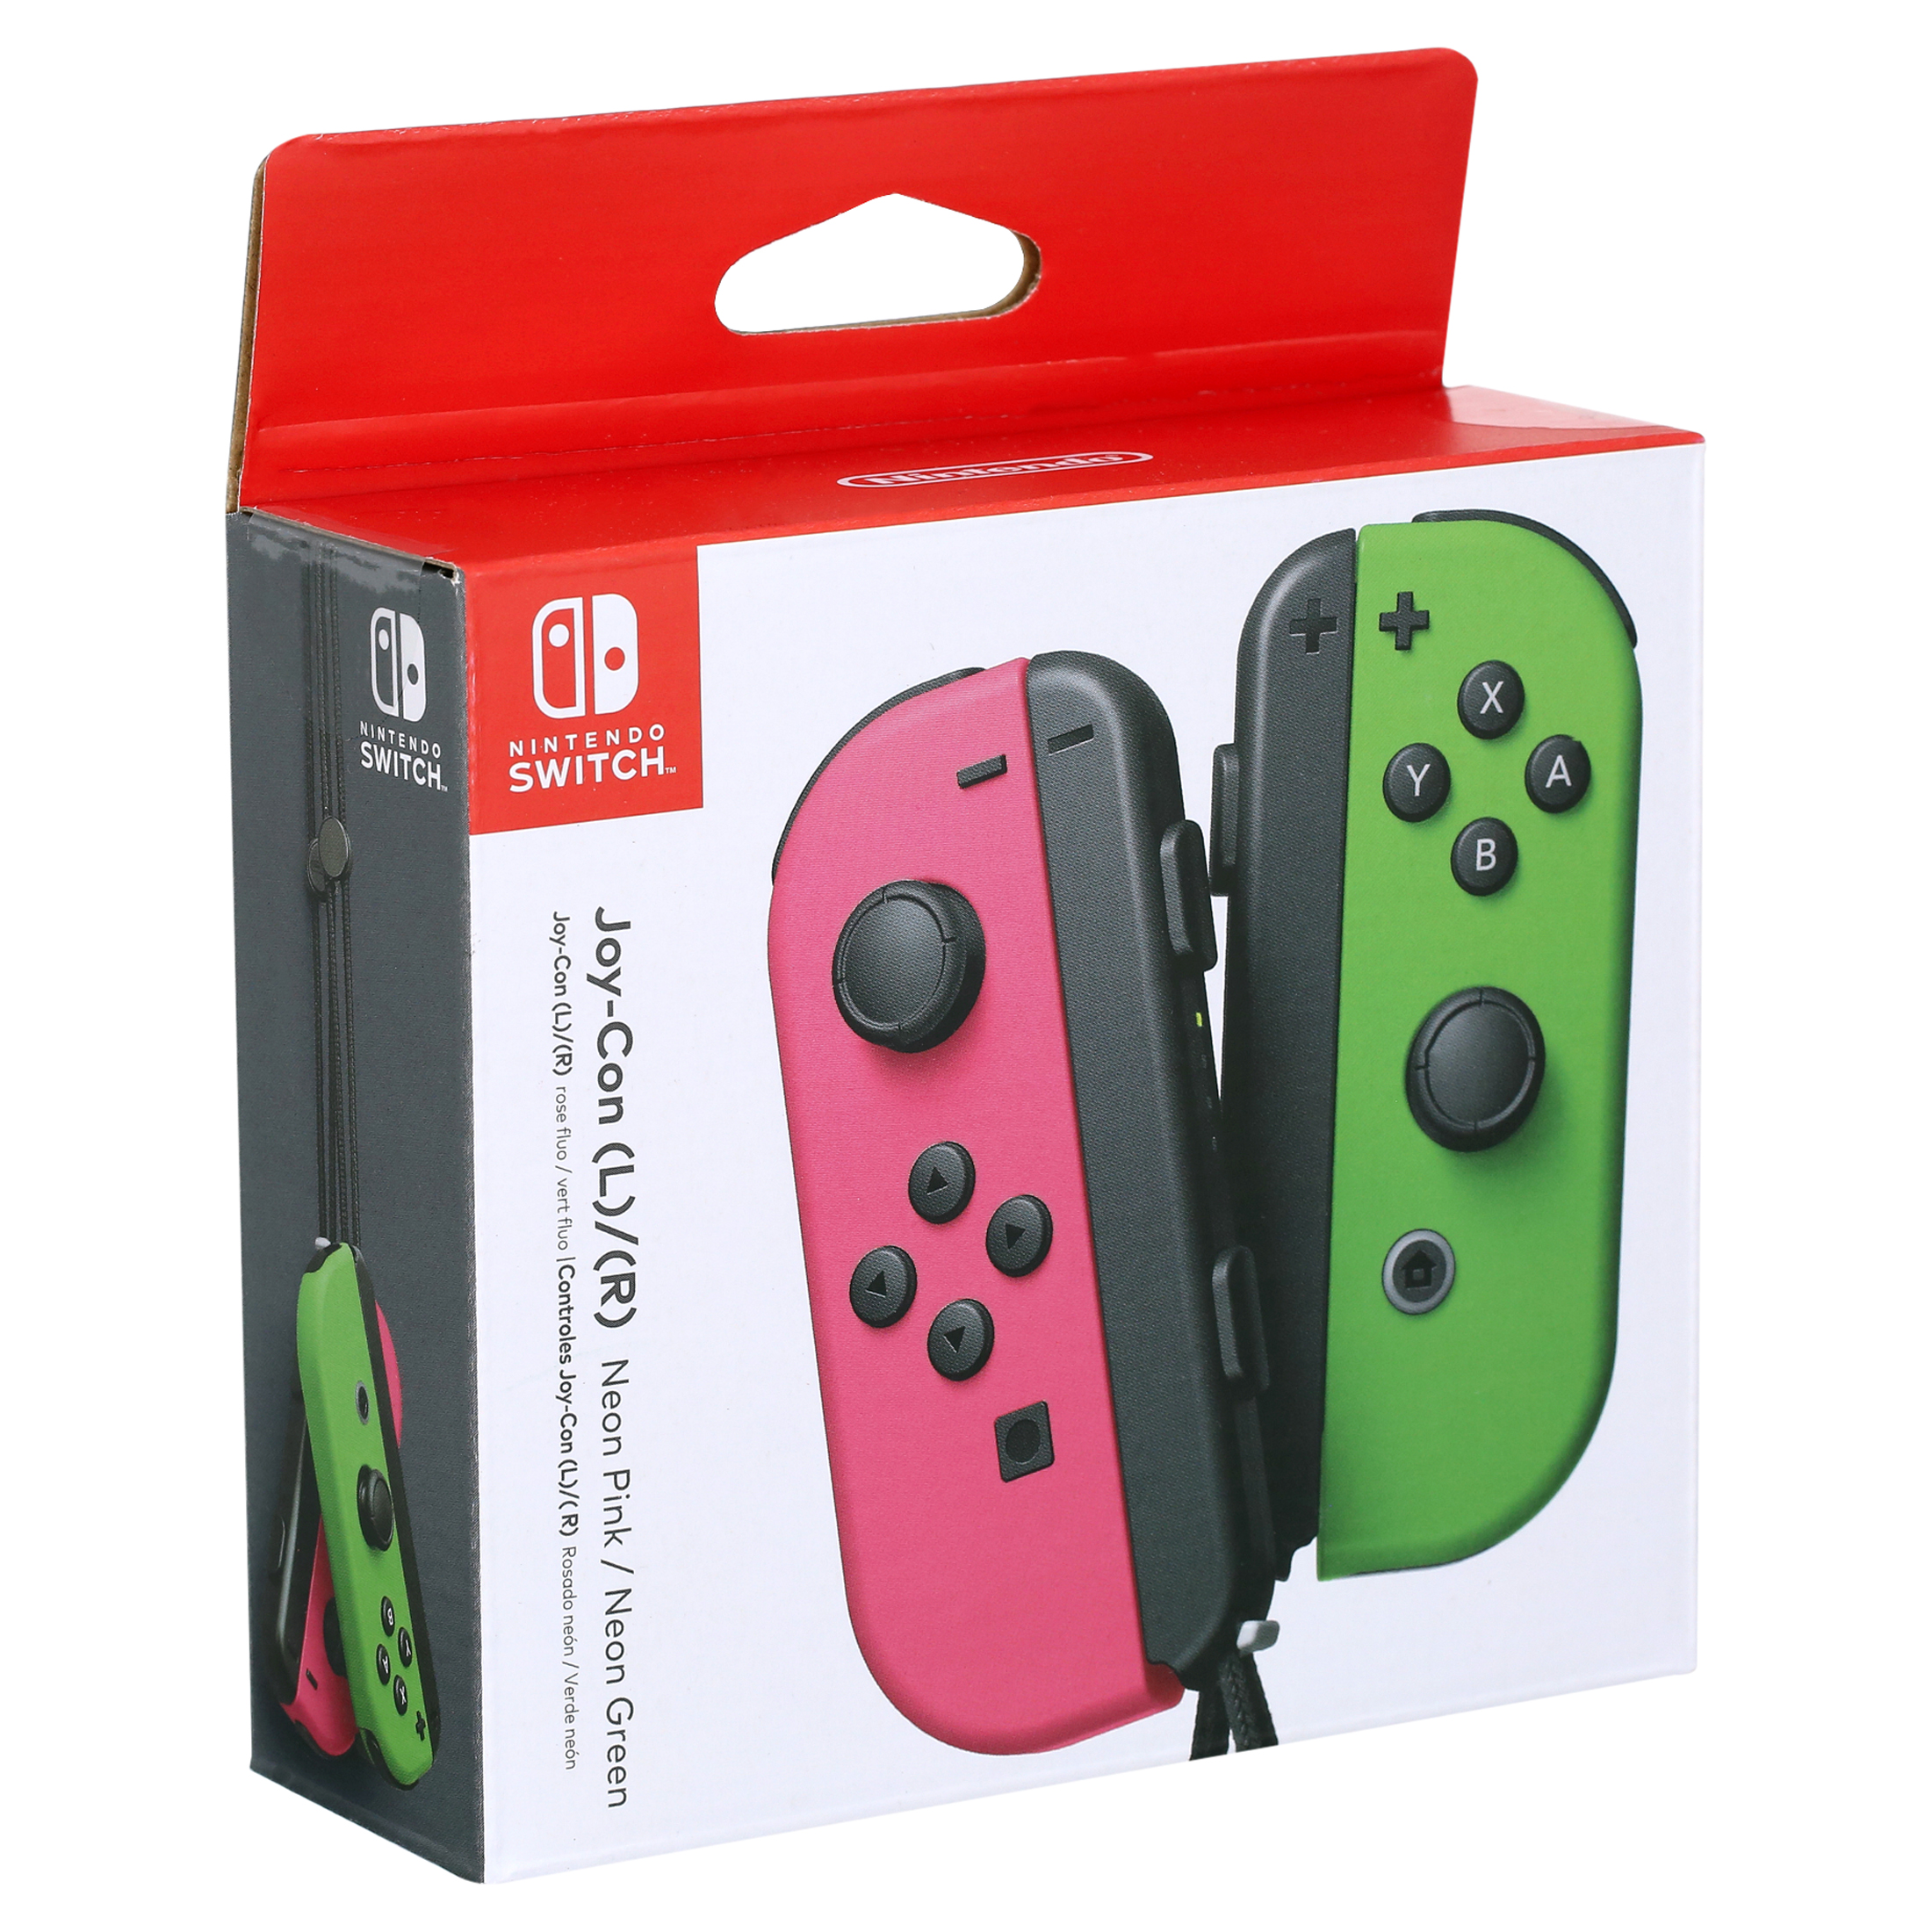 Nintendo Switch Joy-Con Pair, Neon Pink and Neon Green - image 5 of 6